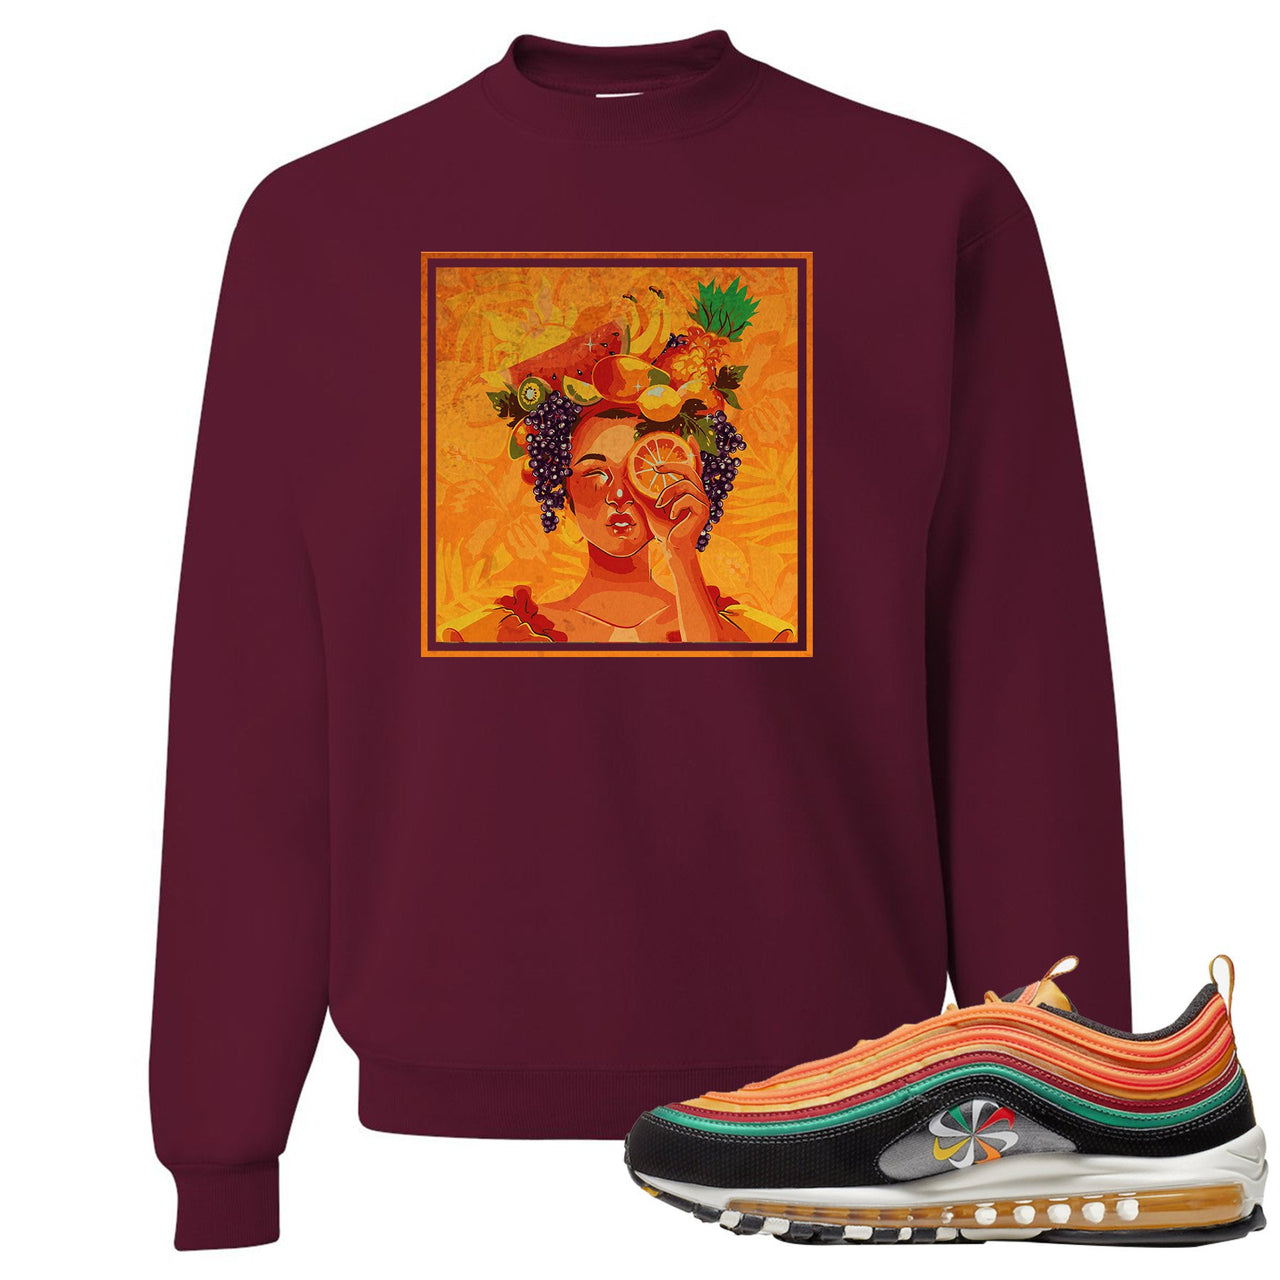 Printed on the front of the Air Max 97 Sunburst maroon sneaker matching crewneck sweatshirt is the Lady Fruit logo